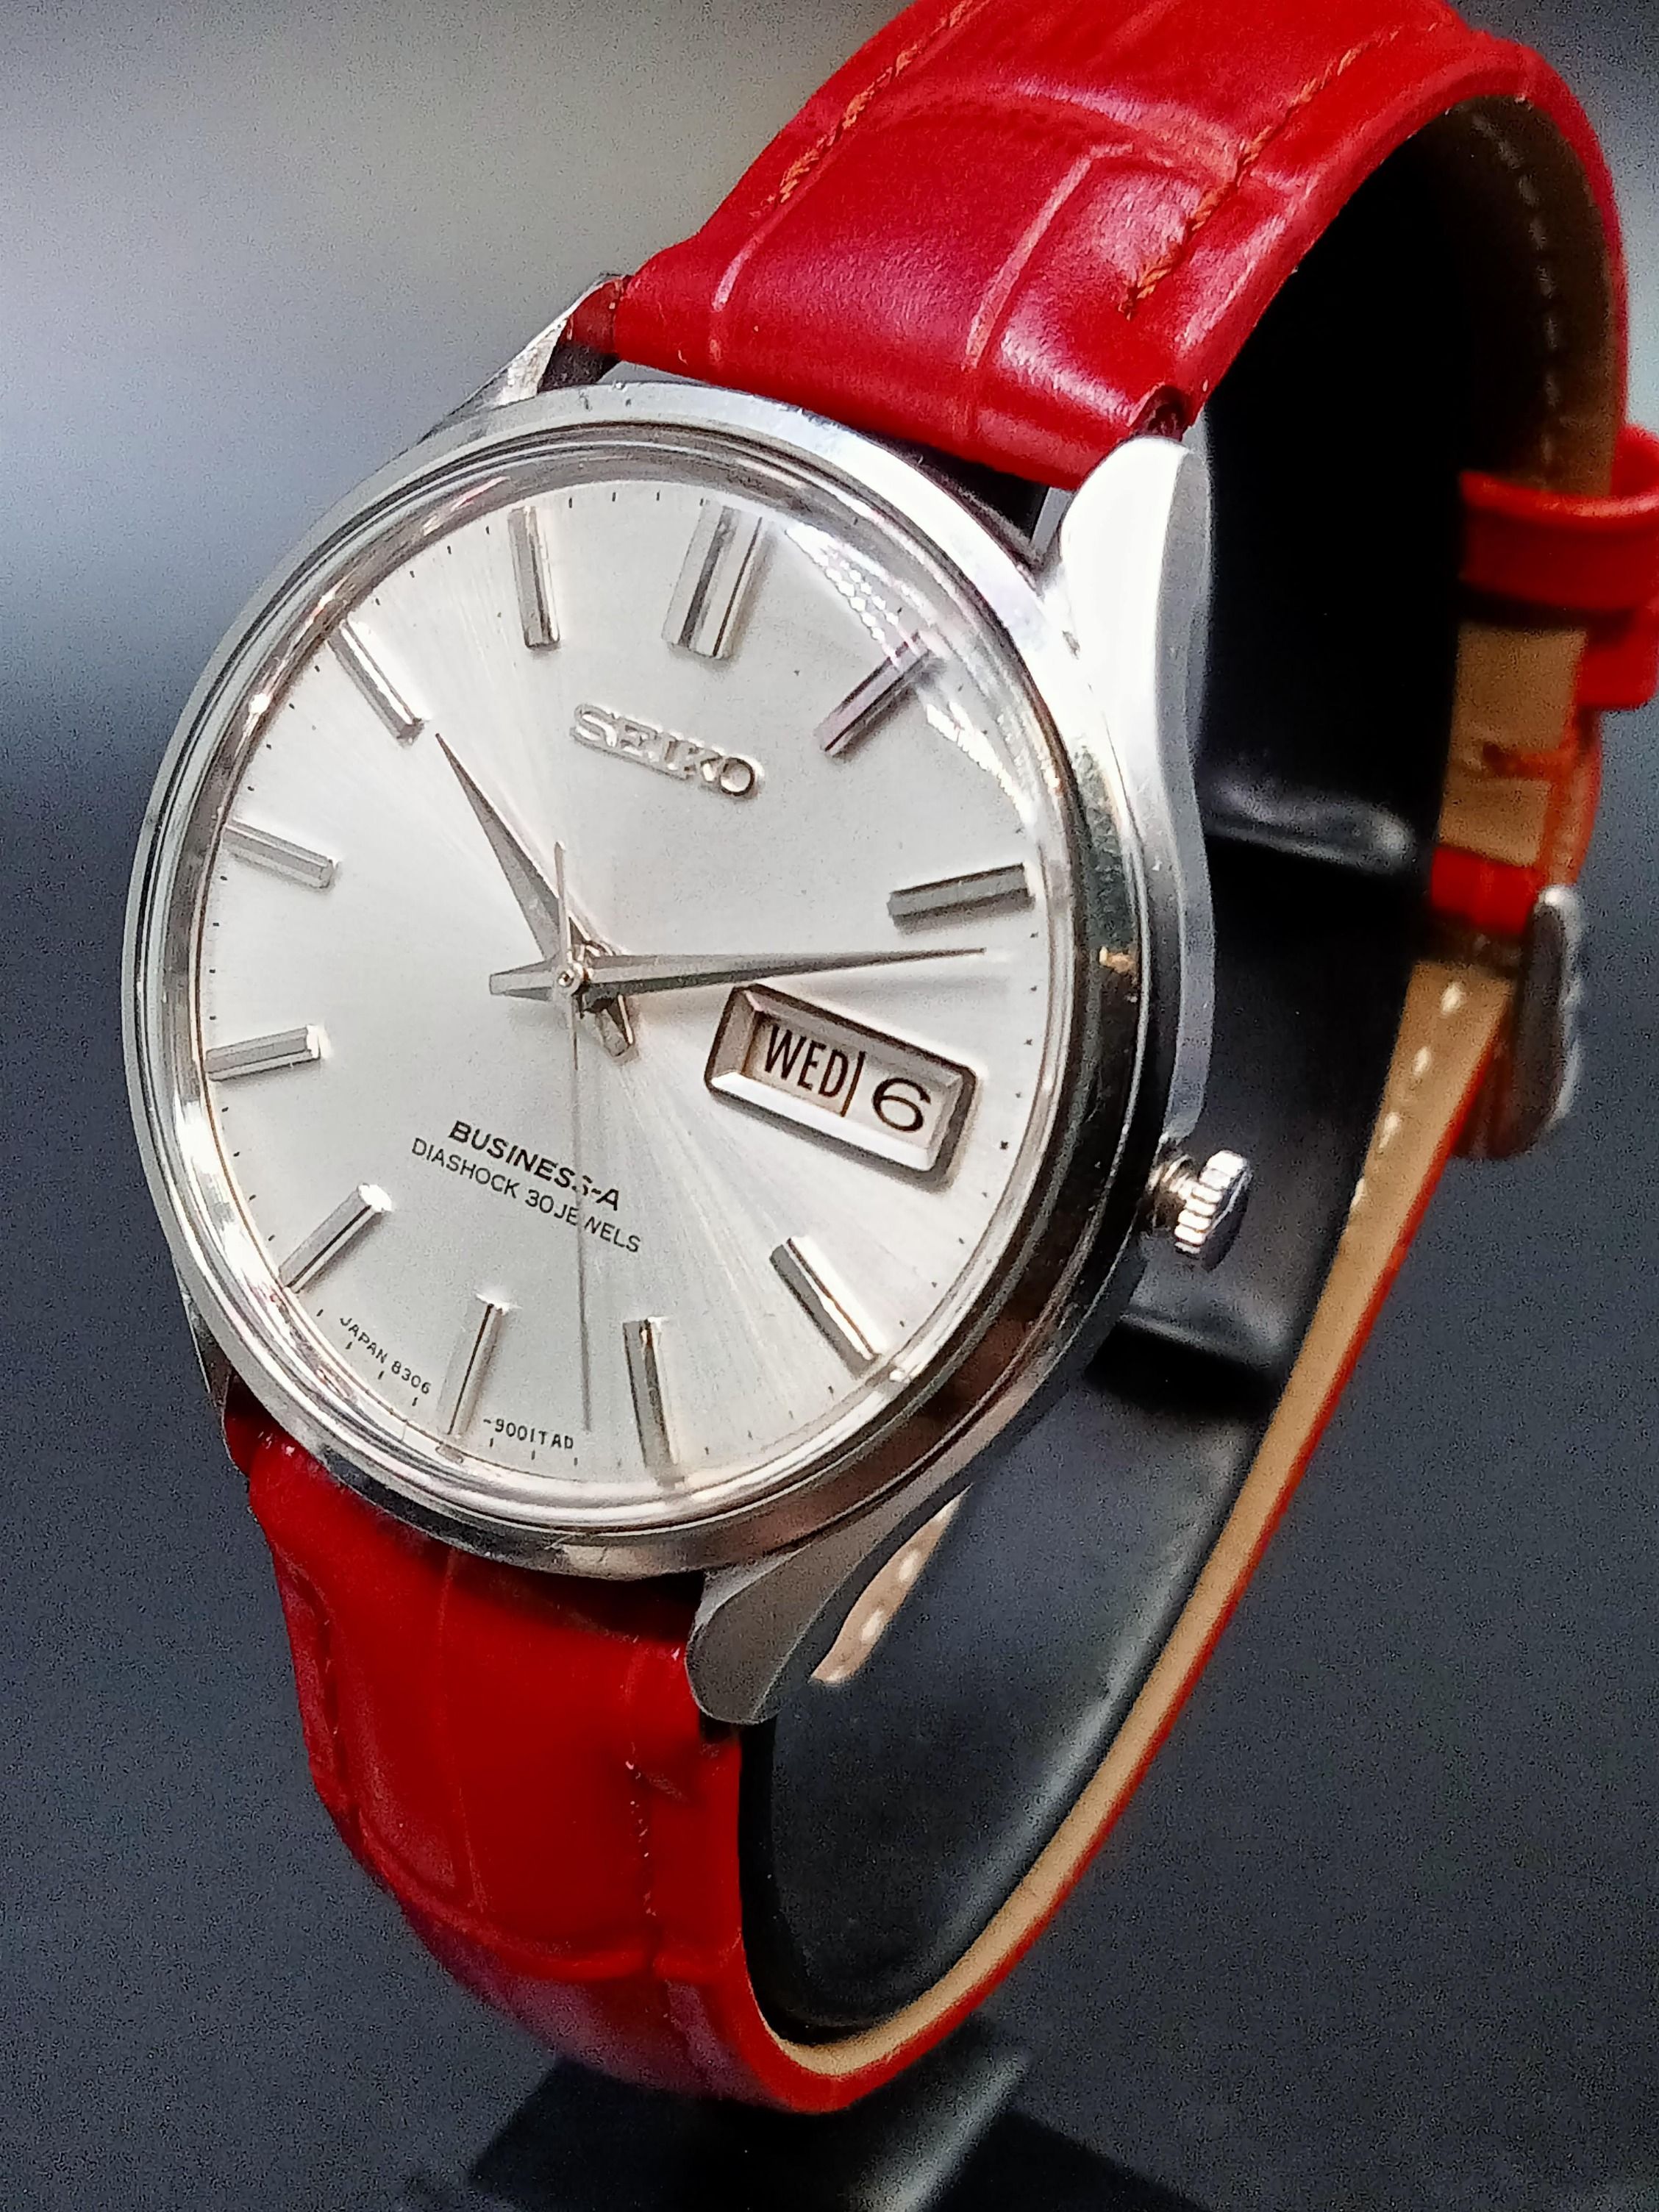 Extremely Rare! Vintage June 1967 Seiko SUWA, Model 8306-9000 Business-A  Diashock, 30J Automatic Watch, Luxury, Watches on Carousell